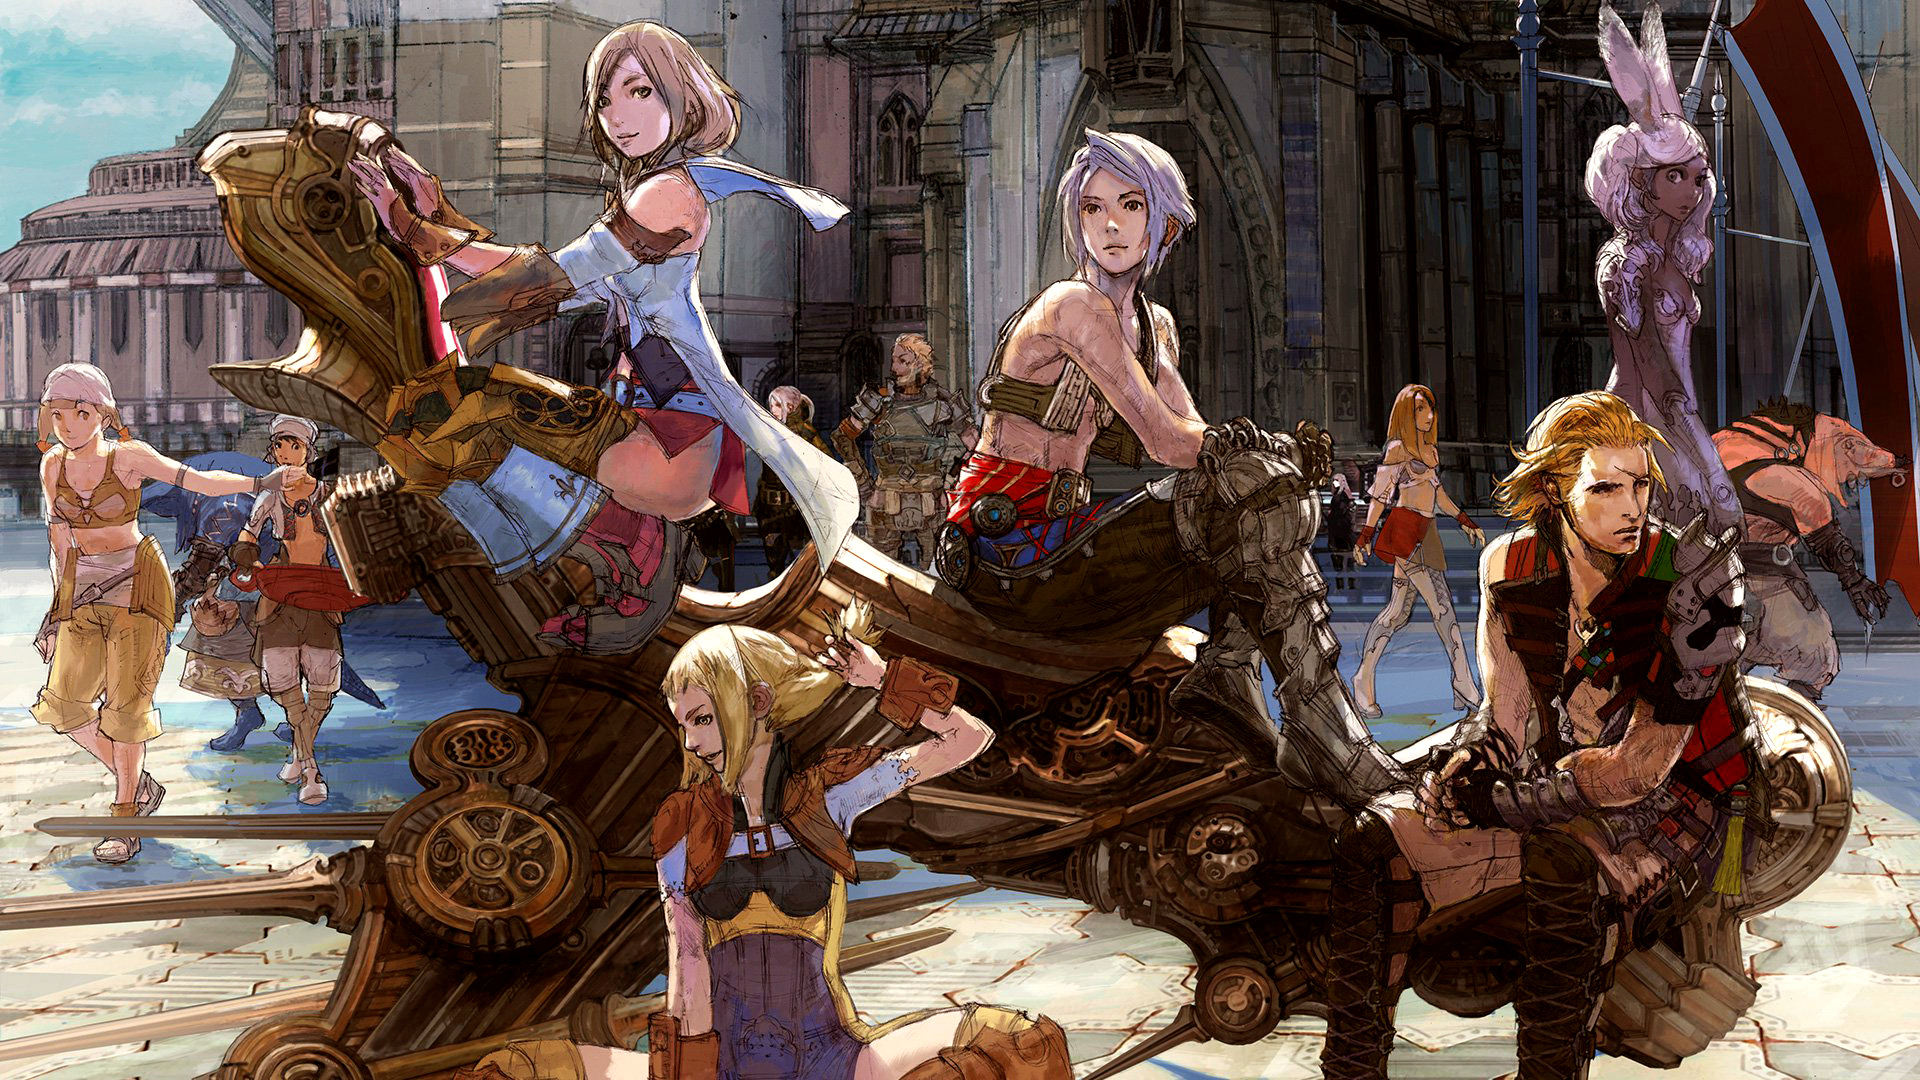 Final Fantasy Xii Video Game Art Artwork Video Game Characters Video Games Square Enix JRPGs Fantasy 1920x1080